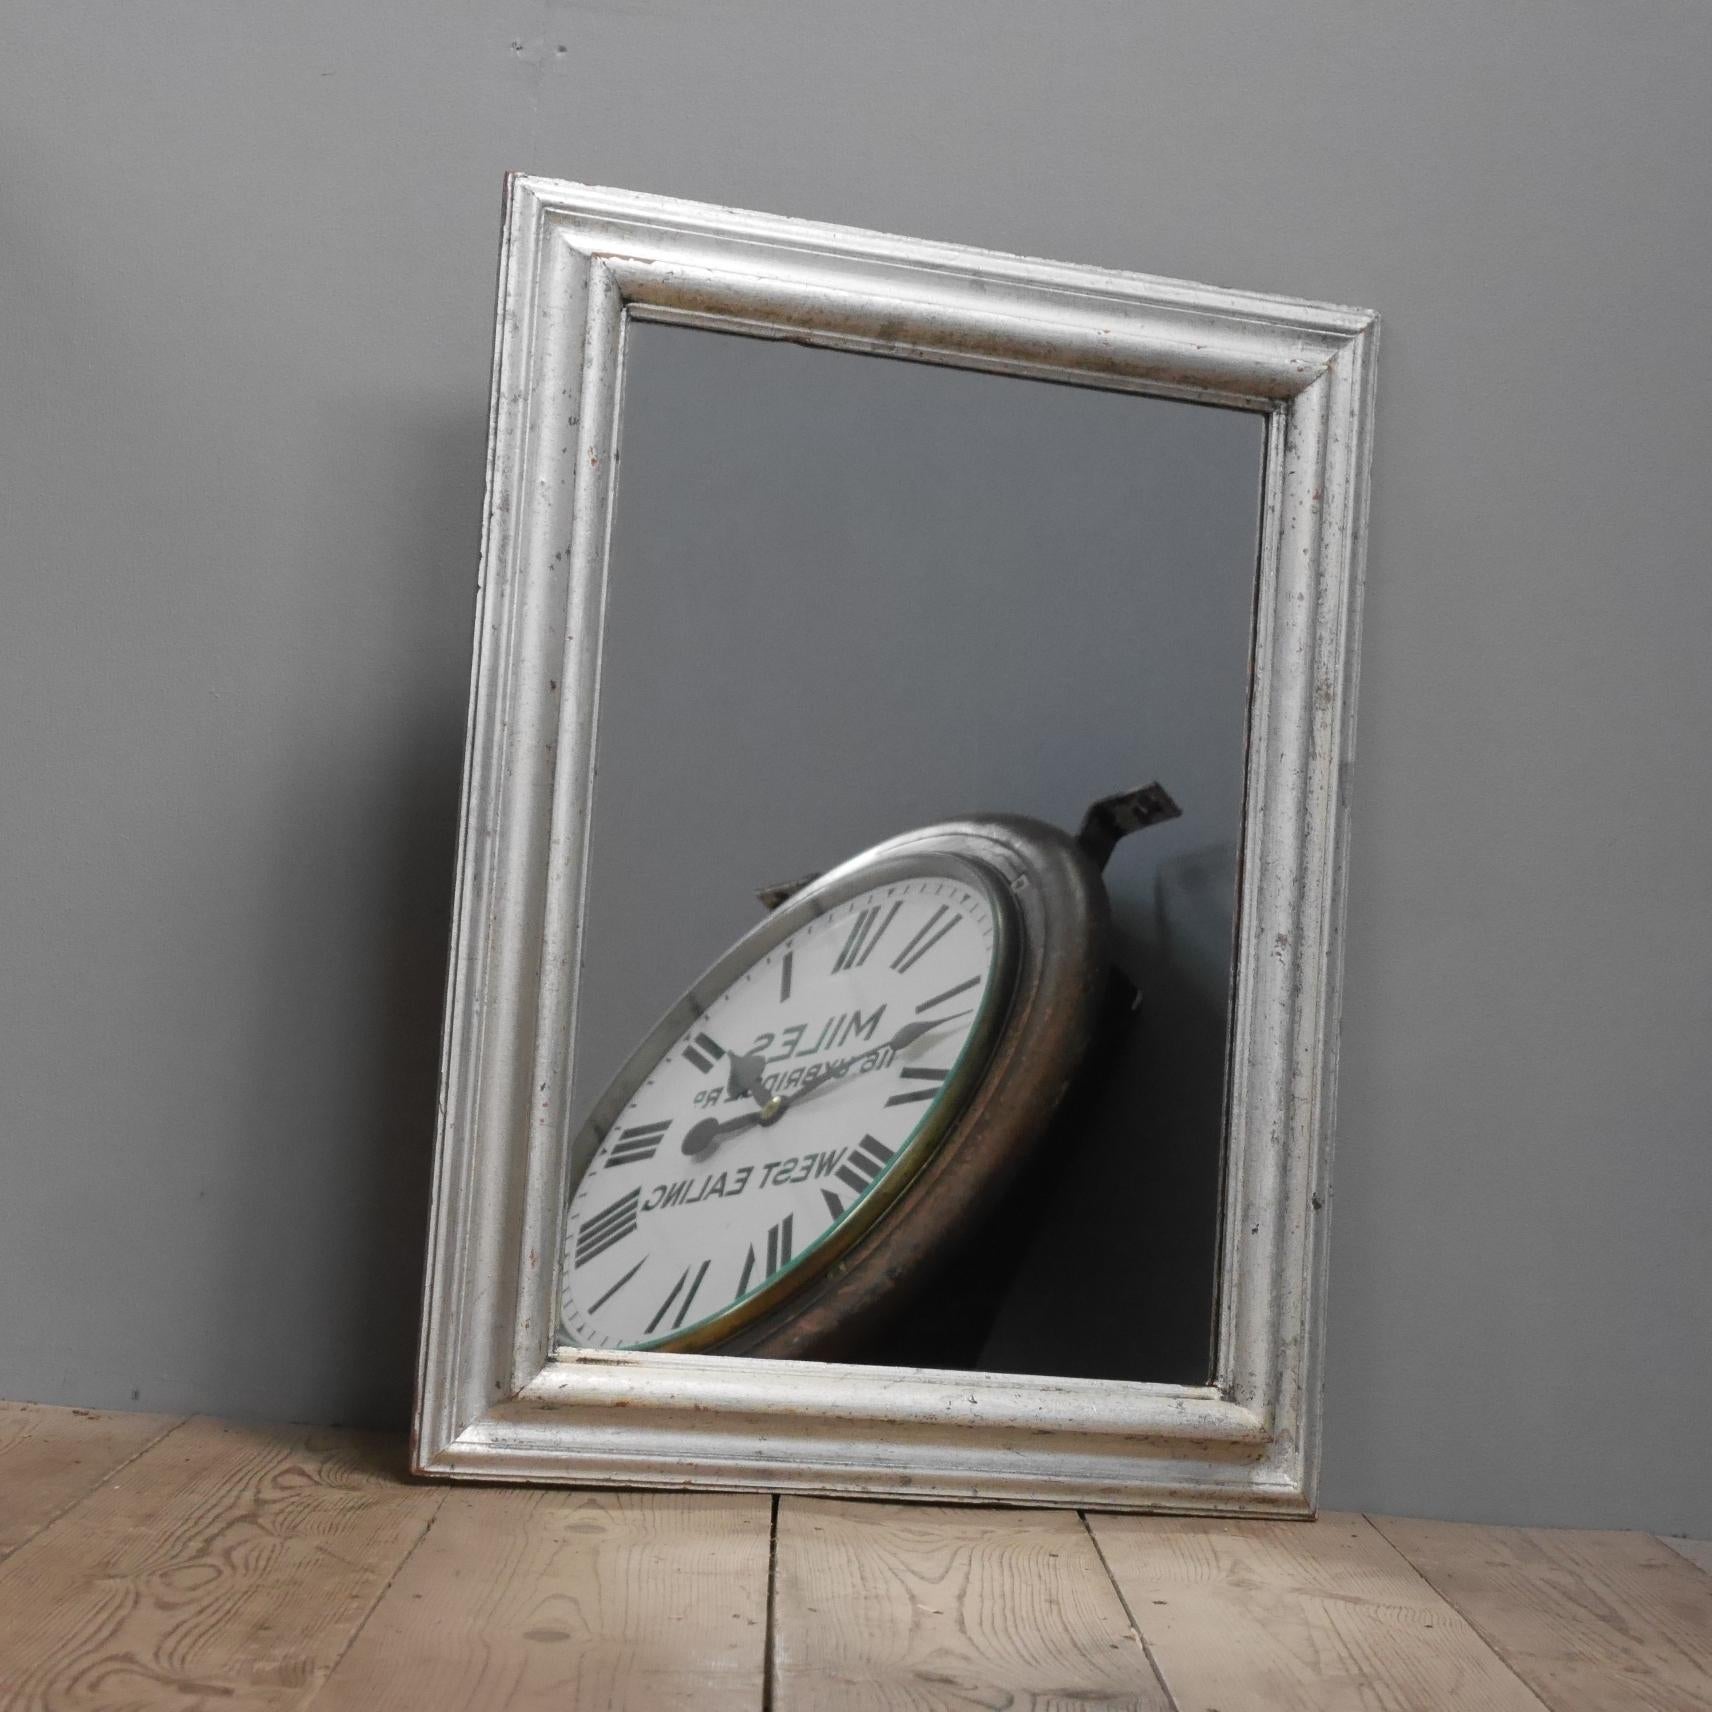 An antique silver leaf mirror.
A wonderful antique wall mirror, the deep, shapely pine frame in the original silver leaf finish. An exquisite example in a versatile size with the perfect amount of wear.
Early 20th century
Wear commensurate with age,